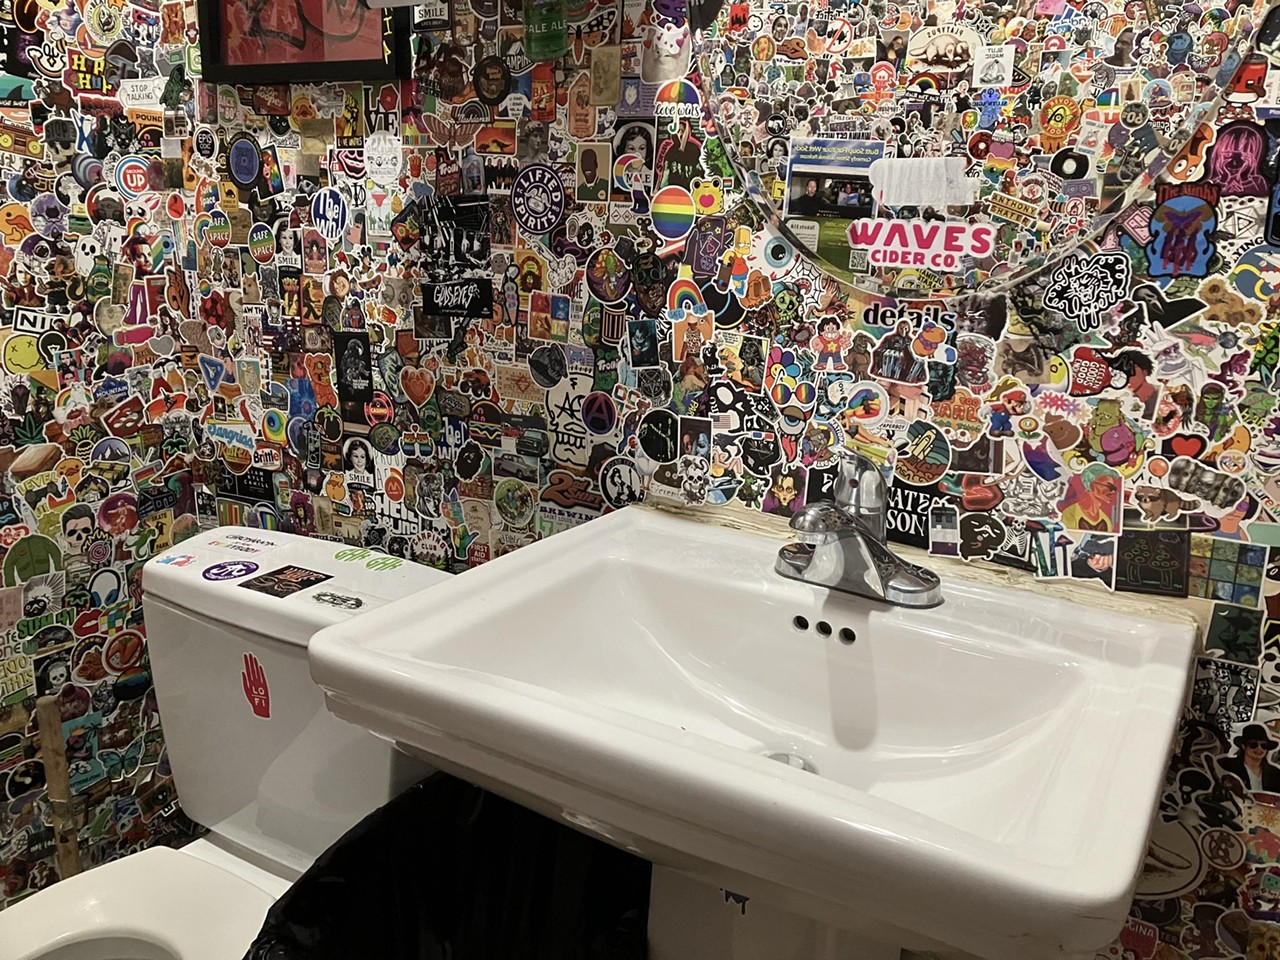 Platypus
Stickers, stickers, stickers and more stickers is the only way to describe the bathroom at Platypus (4501 Manchester Avenue). There's even stickers inside the toilet. But even though this bathroom gives off a grungy, pop-punk vibe with its stickered wallpaper, it's still a super clean bathroom, especially compared to its counterparts in the Grove. Another major bonus about this bathroom is the fact that it's a full room giving you complete privacy to do as you please.